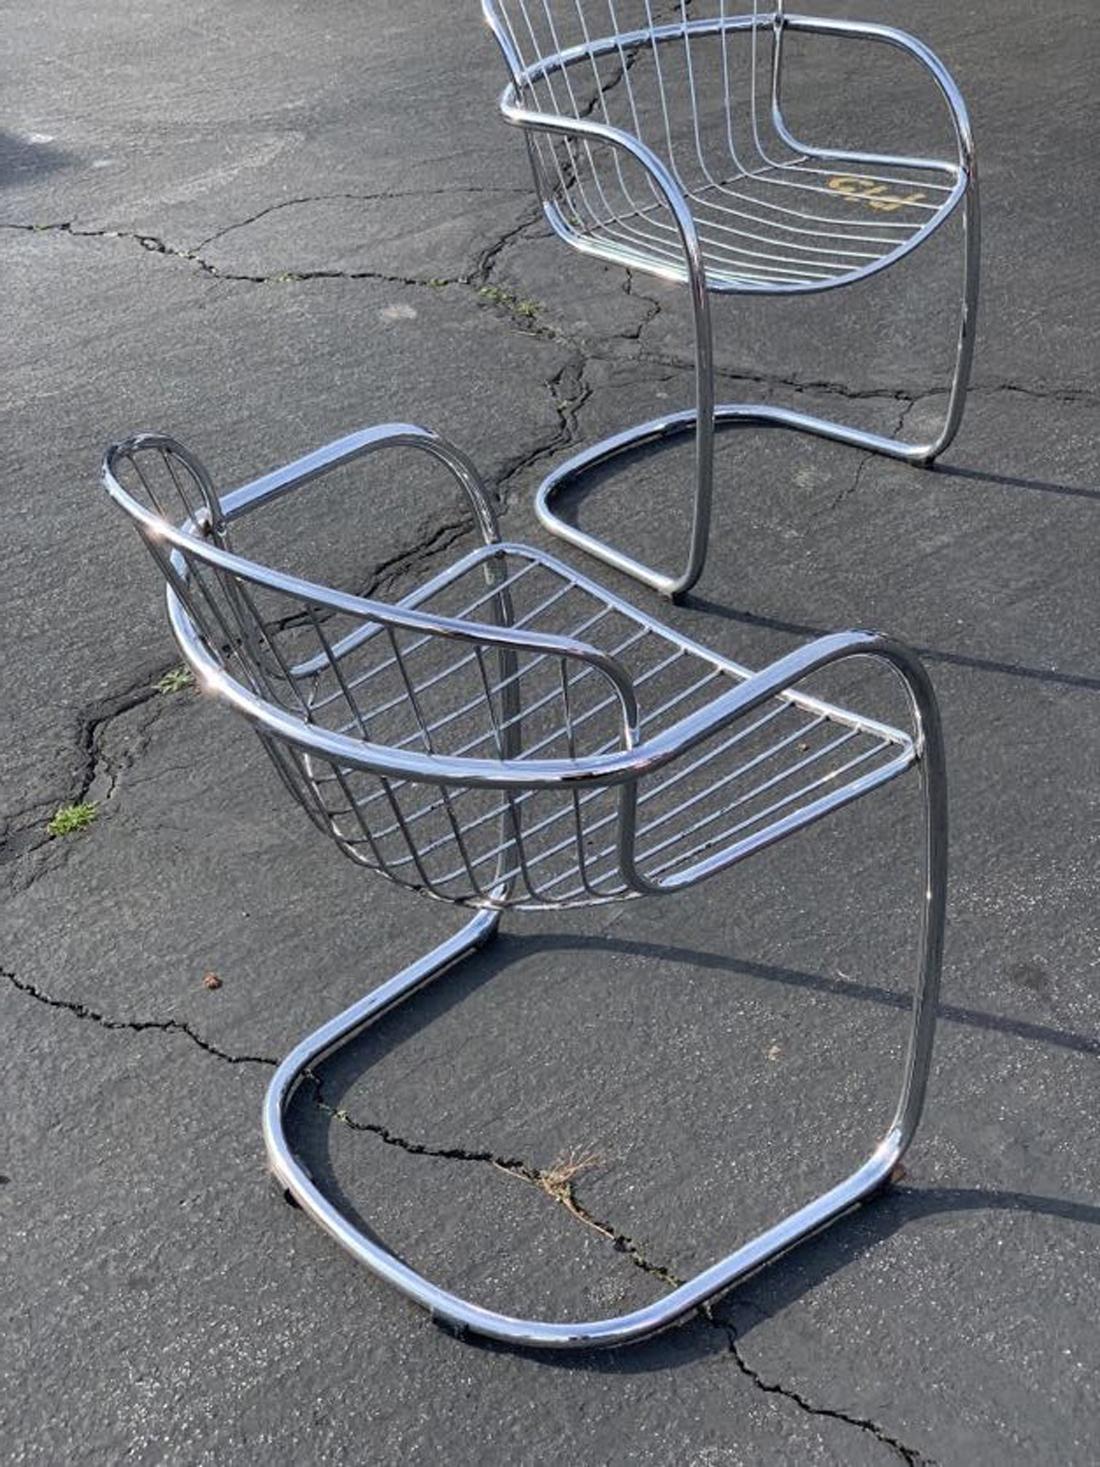 Amazing vintage chrome chair by G. Rinaldi for RIMA from Italy, circa 1970. Perfect lines a chic futuristic & beautiful.